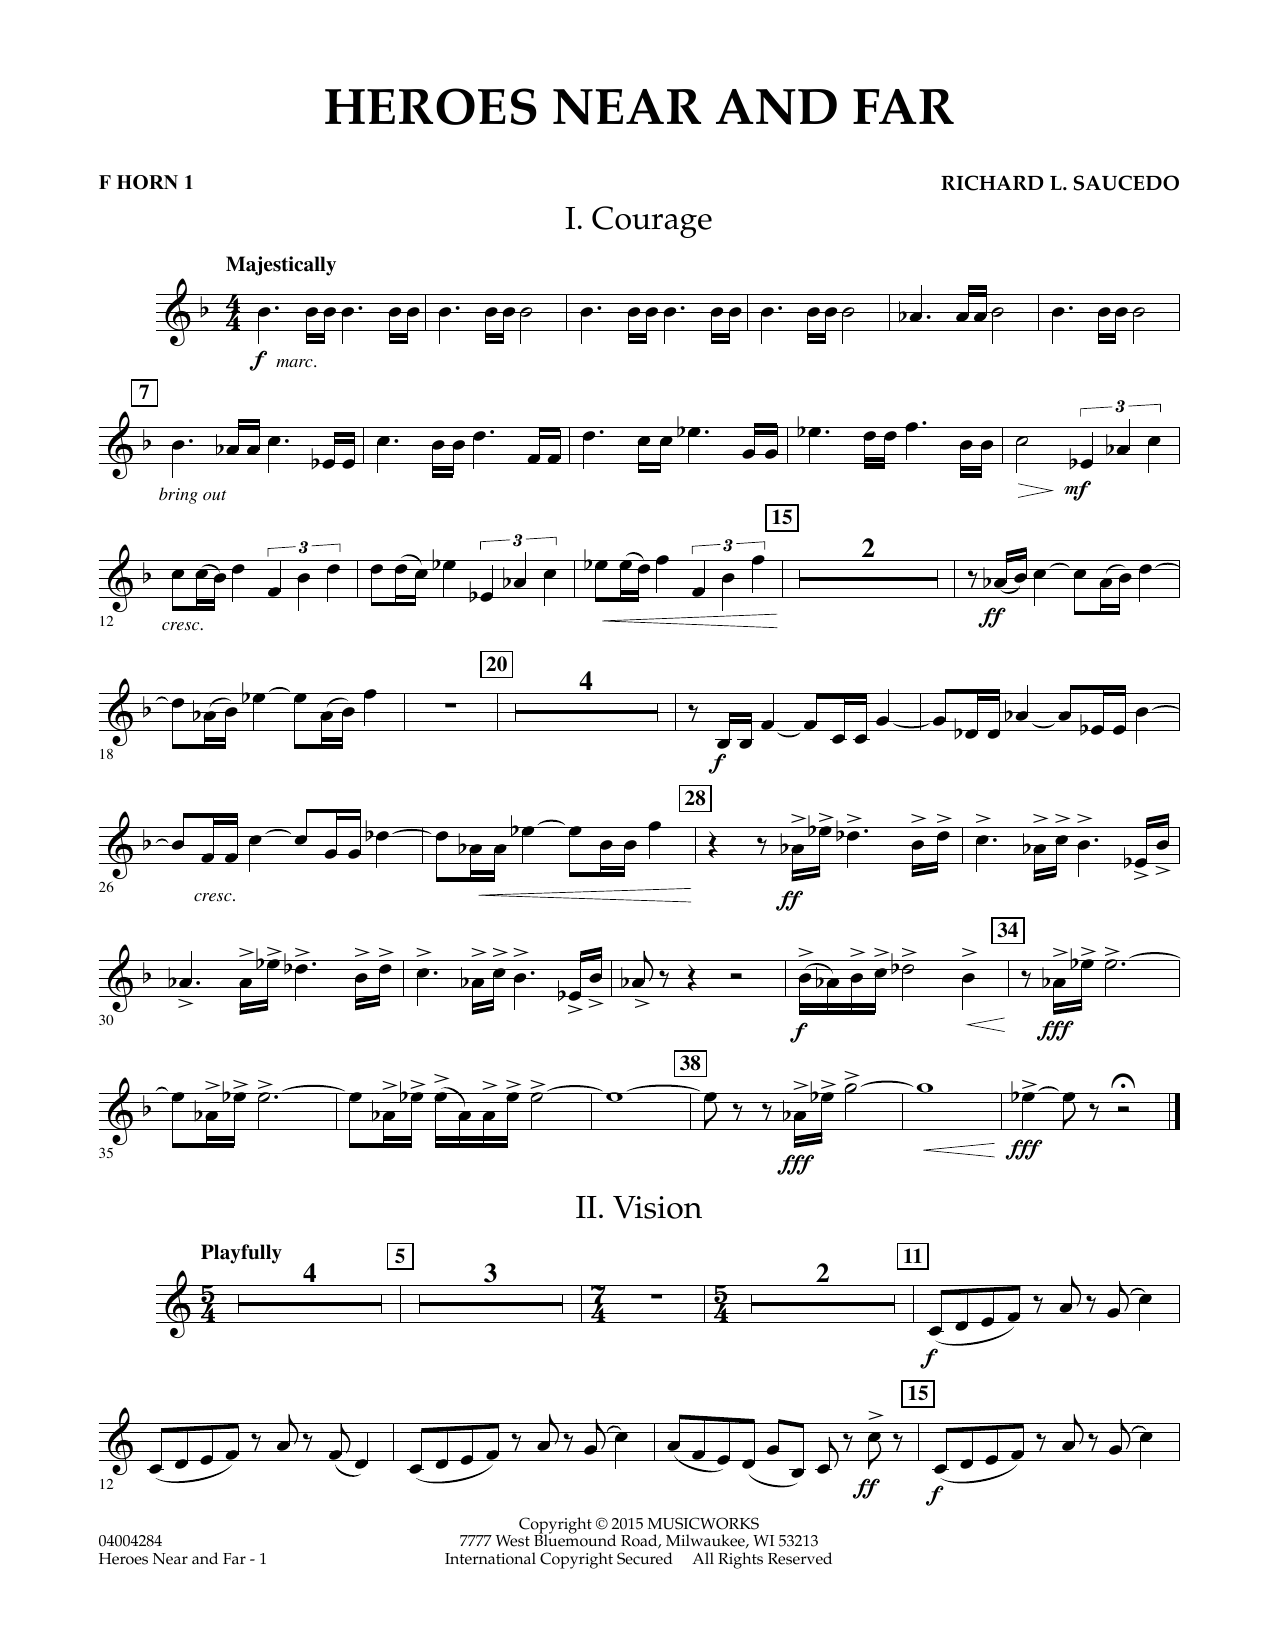 Richard L. Saucedo Heroes Near and Far - F Horn 1 sheet music notes and chords. Download Printable PDF.